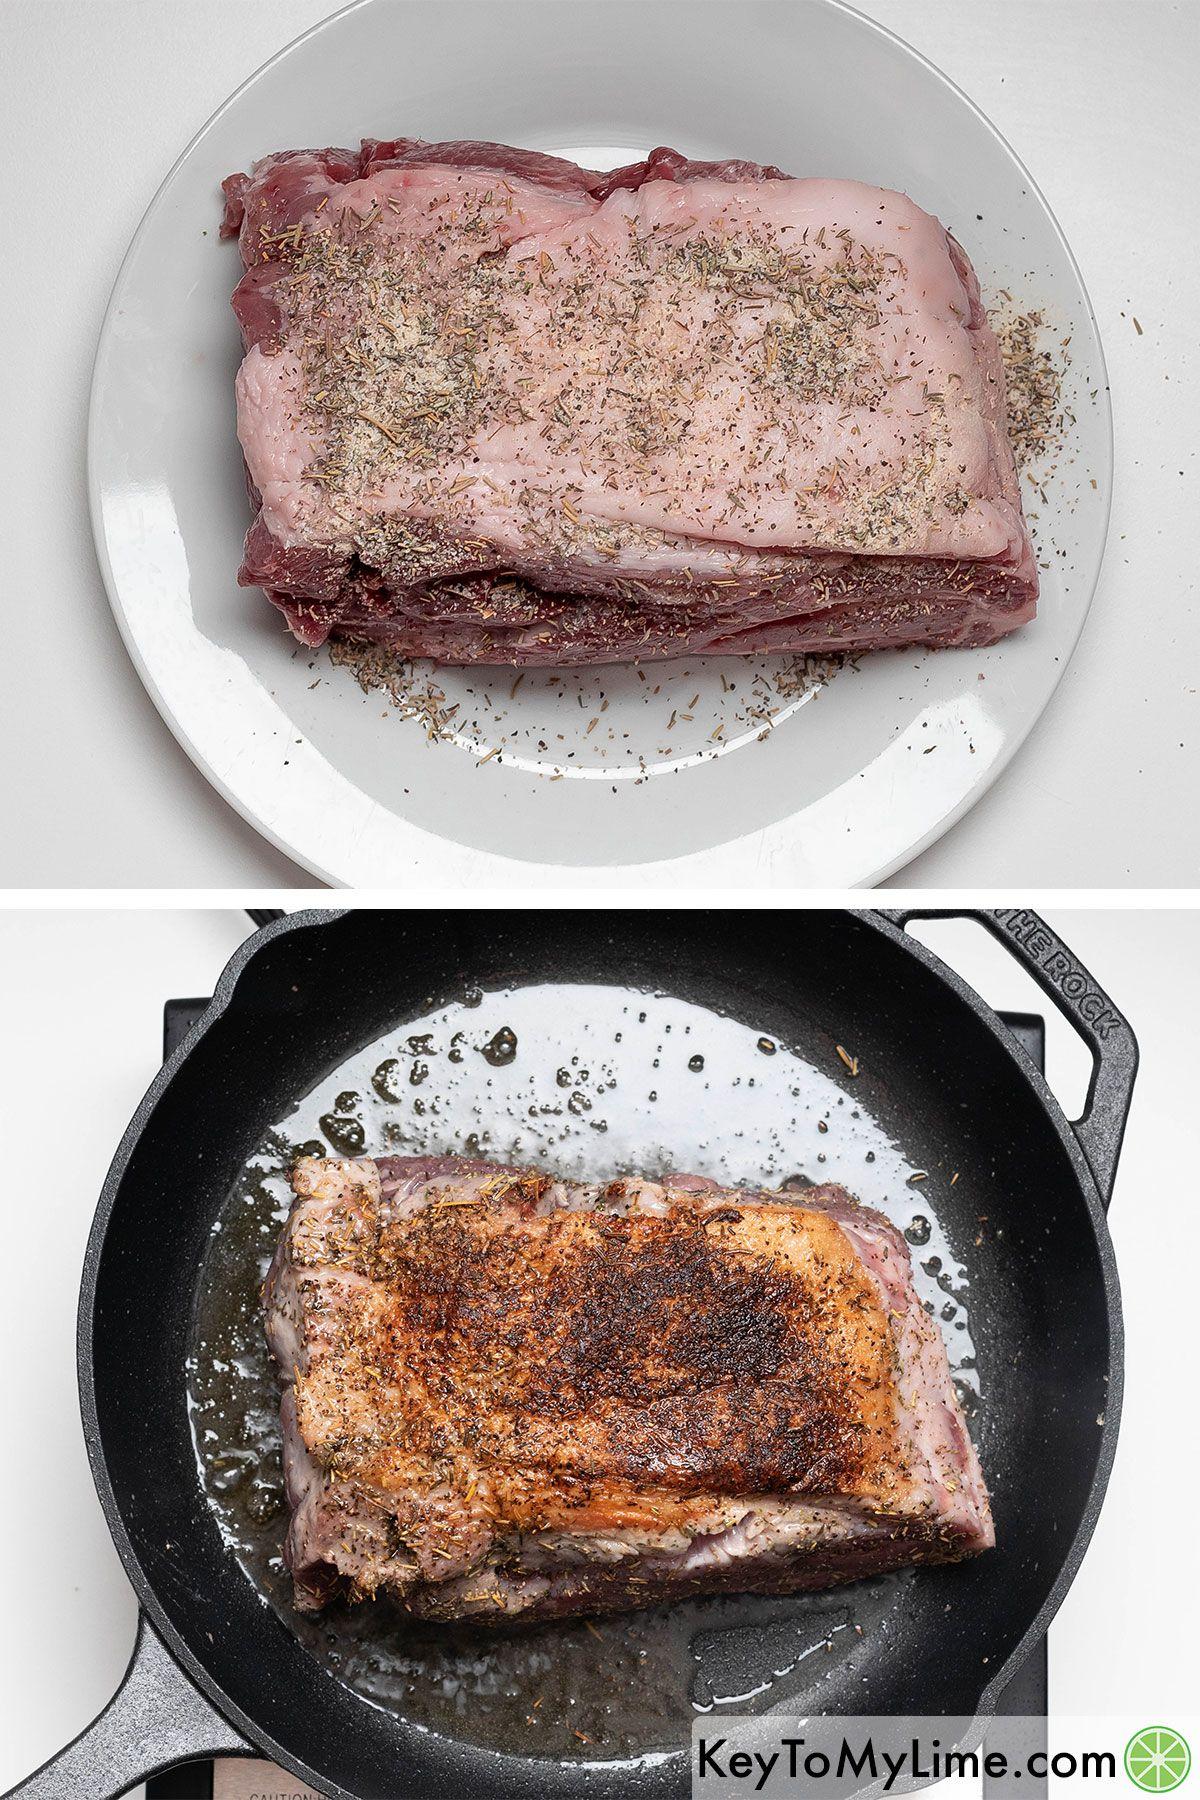 Rubbing the seasoning mix over the roast on all sides then searing in a hot skillet.